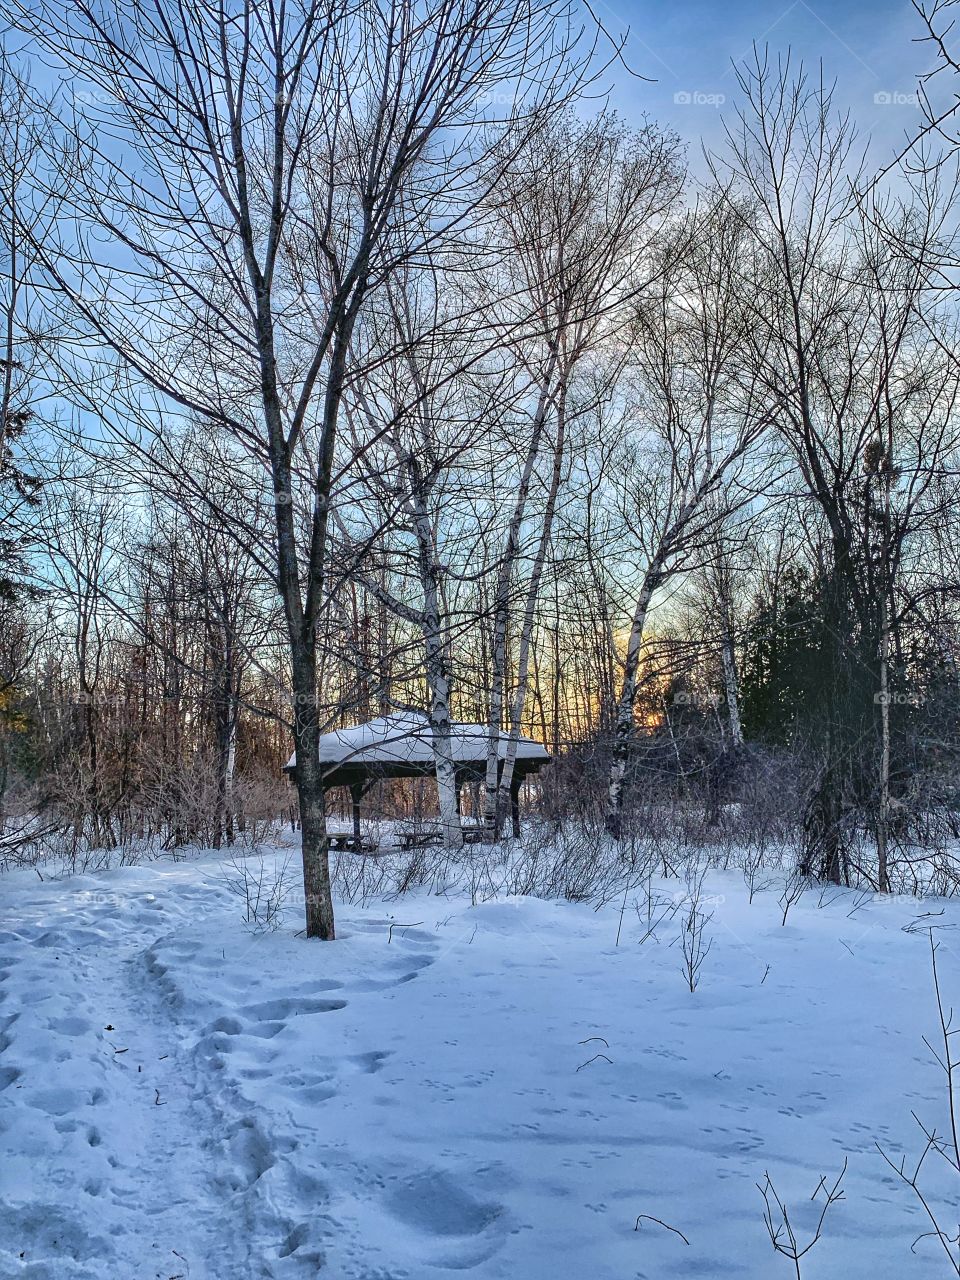 A gazebo in a snowy forest at sunset.